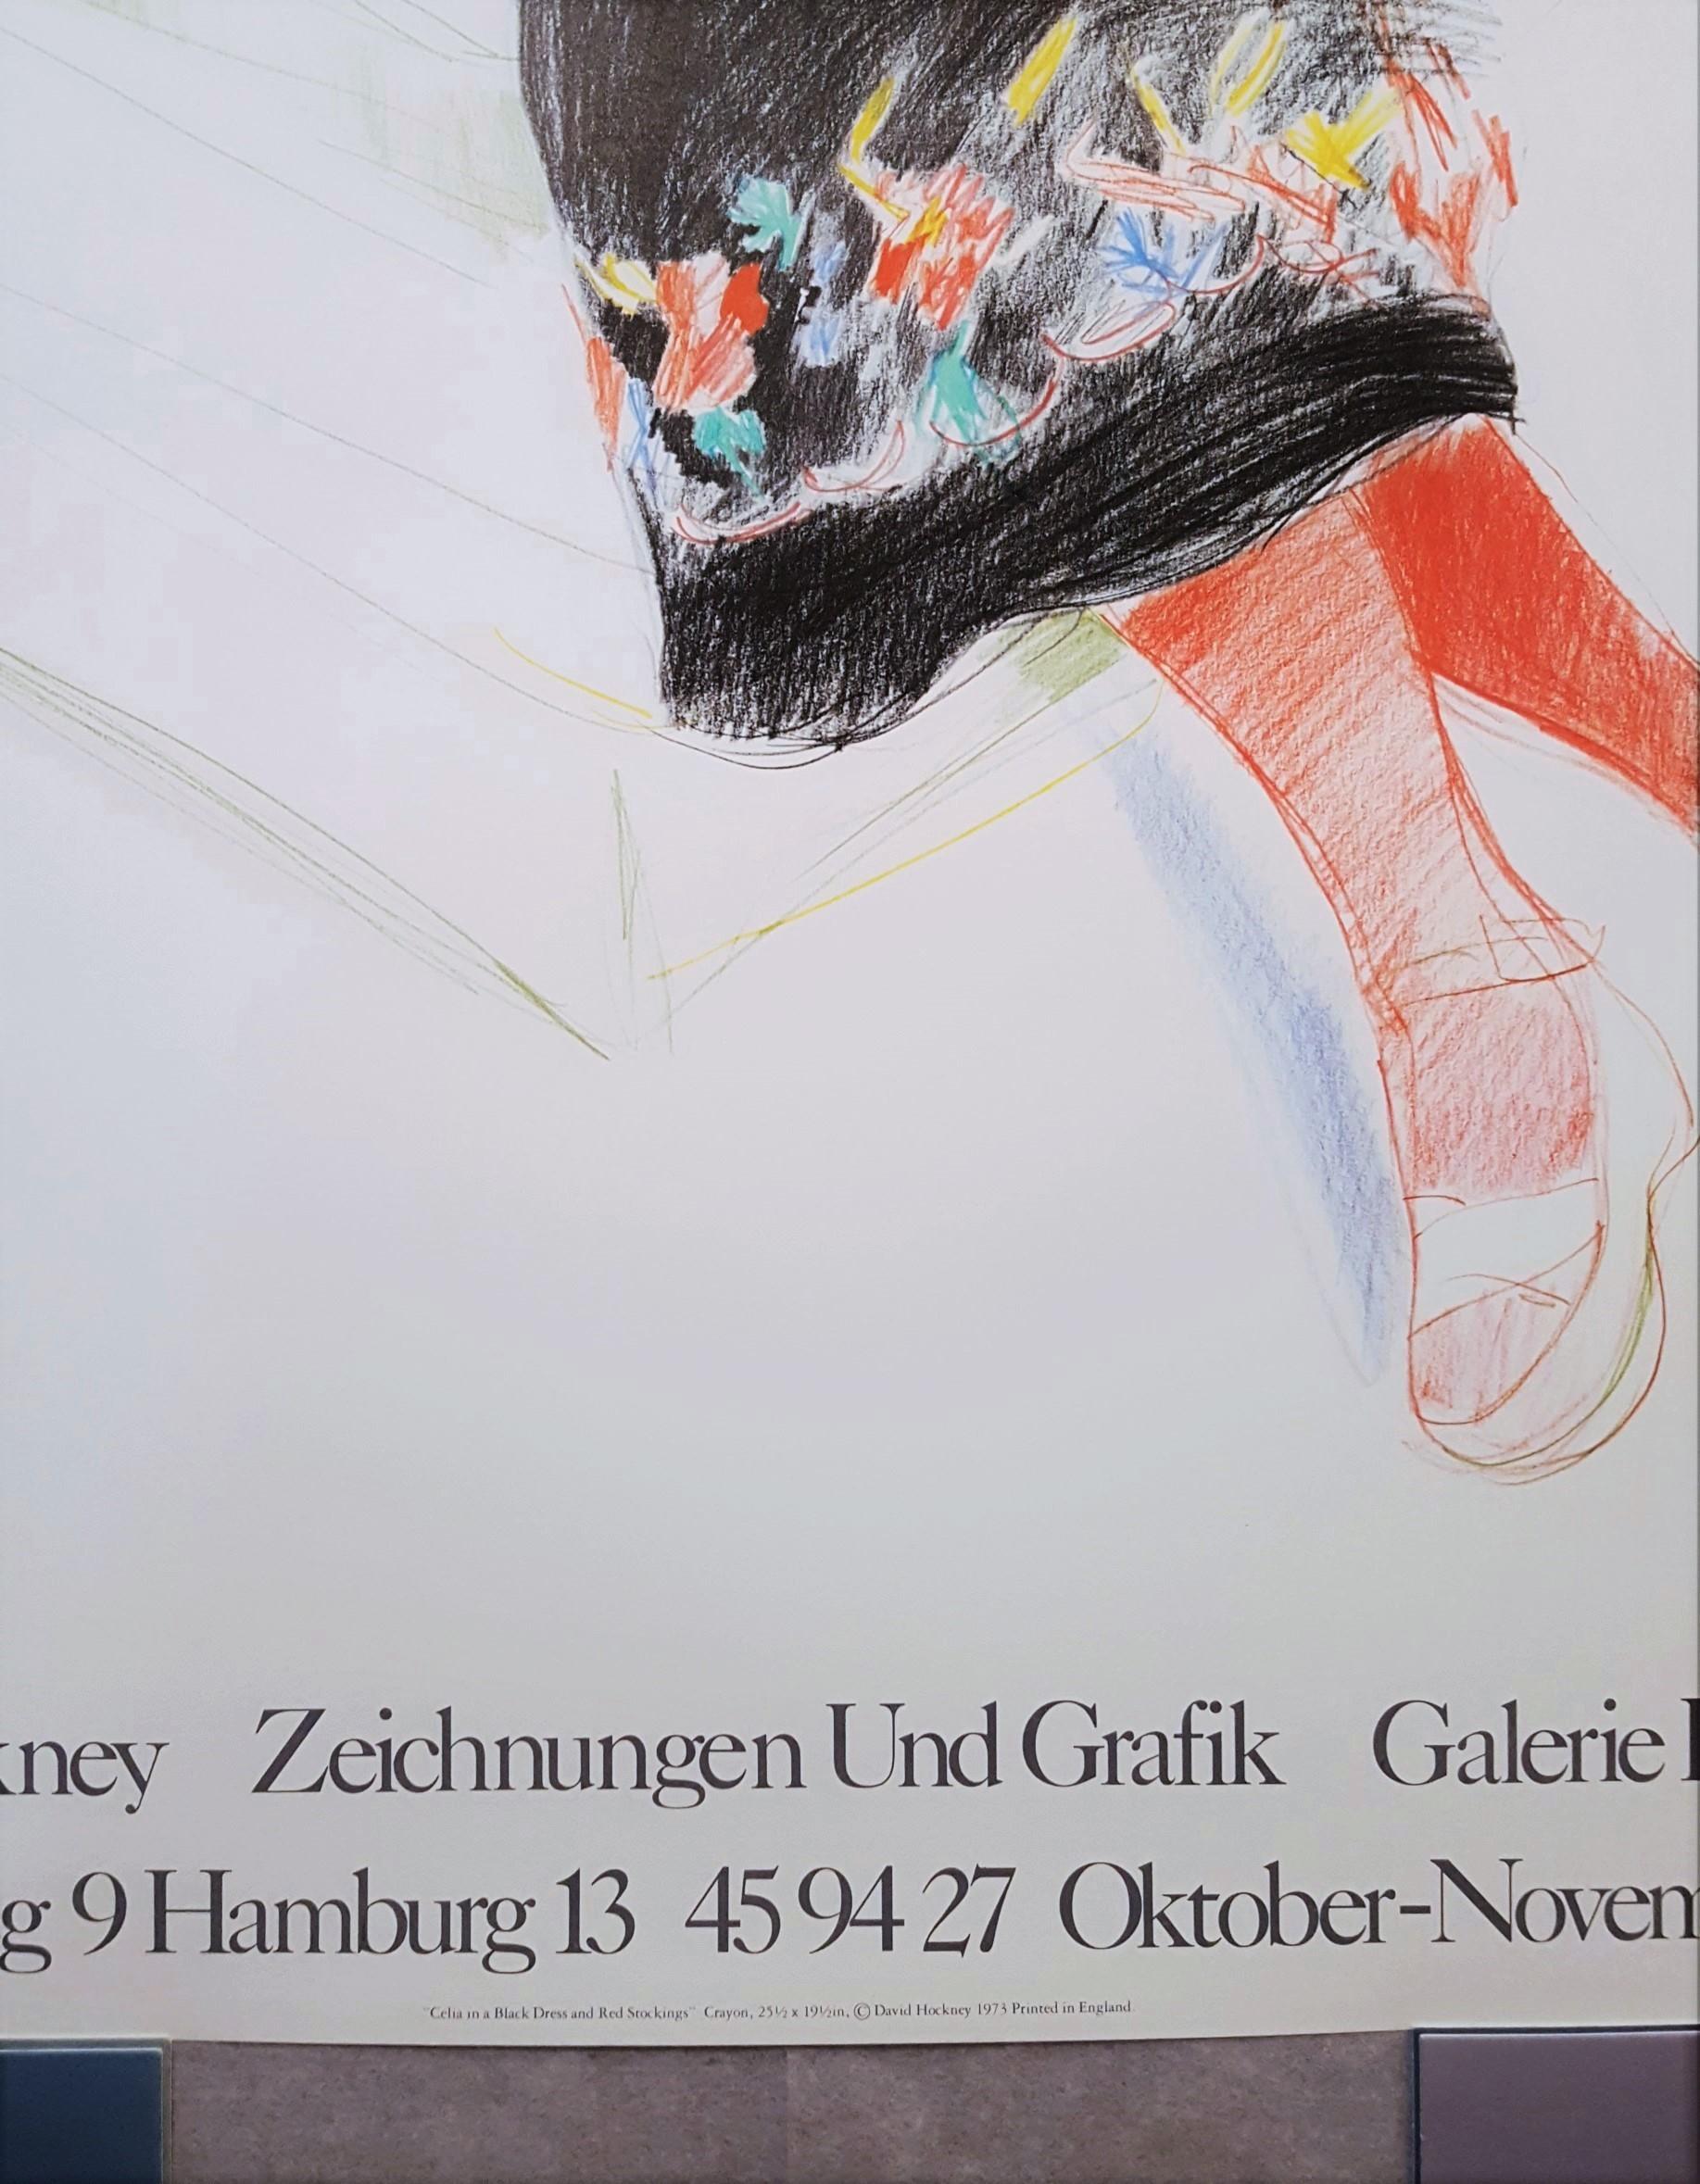 Galerie Kammer (Celia in a Black Dress and Red Stockings) - Gray Figurative Print by (after) David Hockney